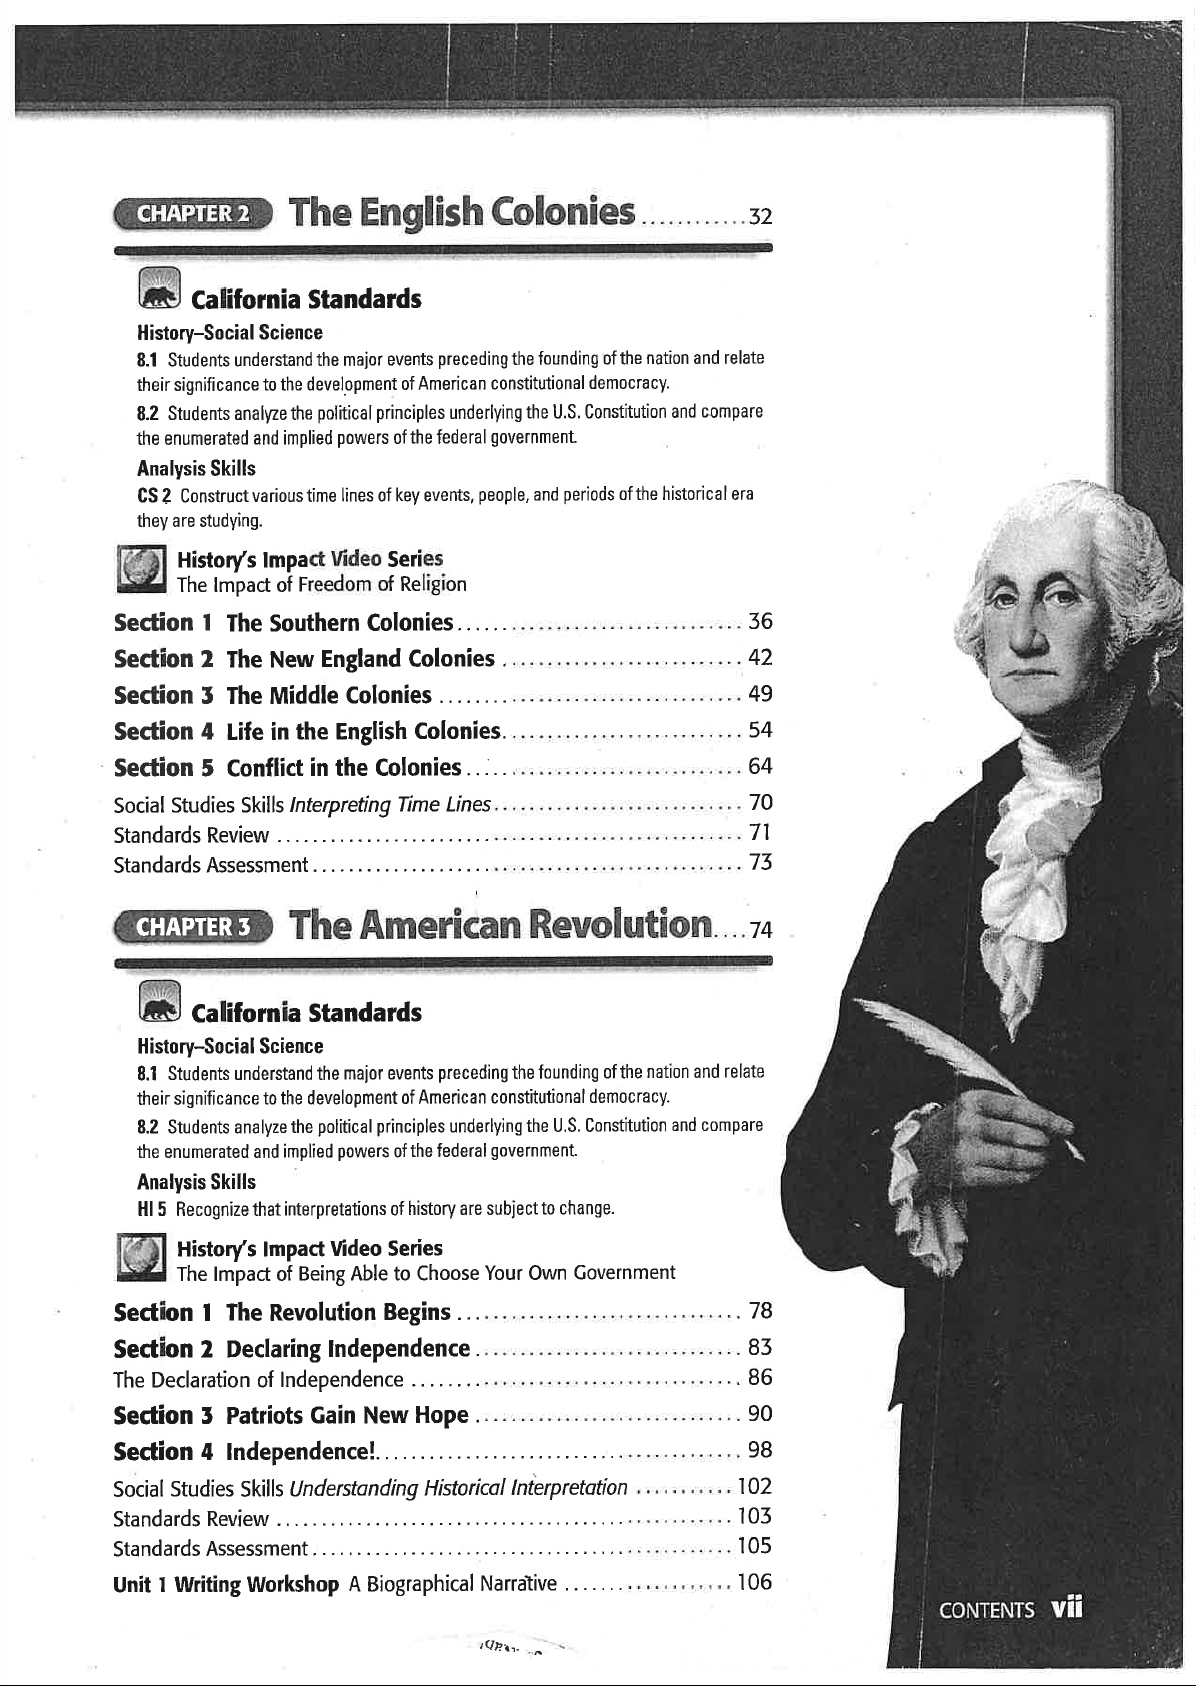 US_History_Textbook_8th_Grade_Table_of_Contents Download